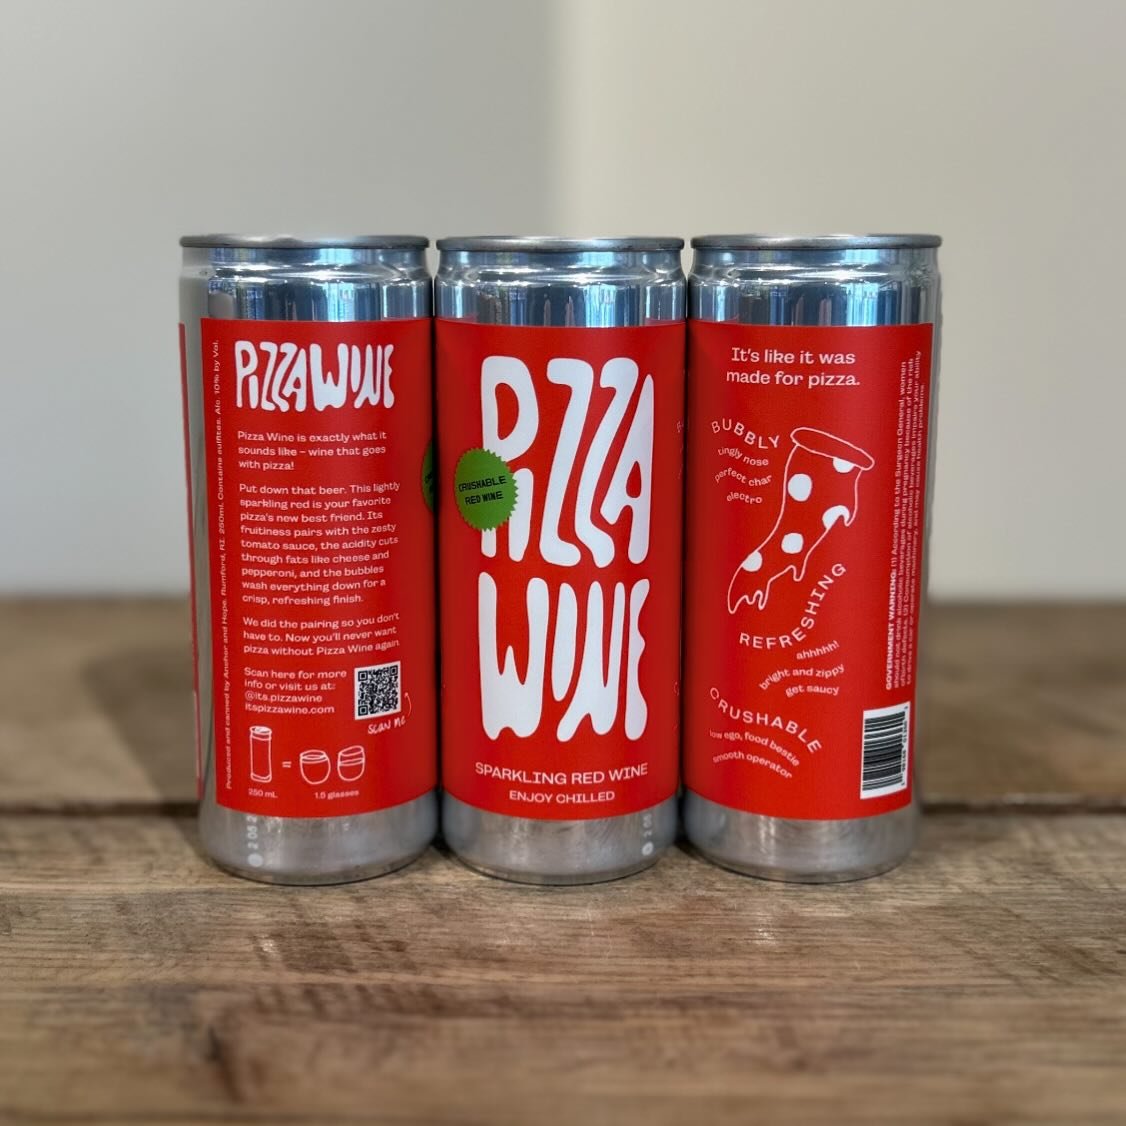 Introducing @its.pizzawine #NowAvailable #SudburyCraftBeer #TheSuds
&mdash;
CRUSHABLE, SPARKLING RED WINE &ndash; MADE FOR PIZZA

🍕 THE ACIDITY CUTS THROUGH FATS LIKE CHEESE &amp; PEPPERONI.

🍕THE FRUITINESS PAIRS WITH ZESTY TOMATO SAUCE.

🍕THE BU